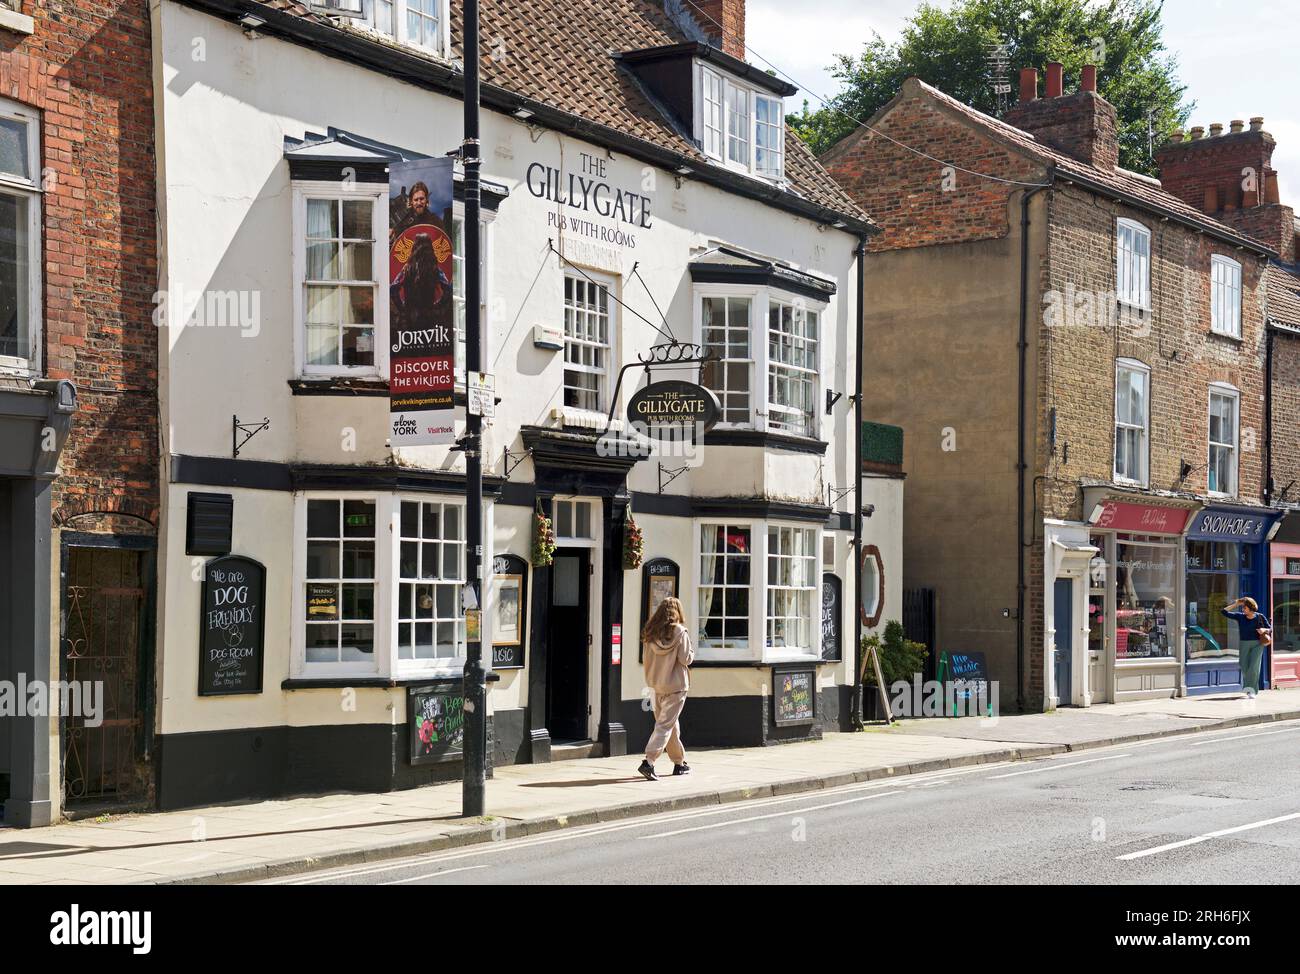 Das Gillygate Pub in Gillygate, York, North Yorkshire, England Stockfoto